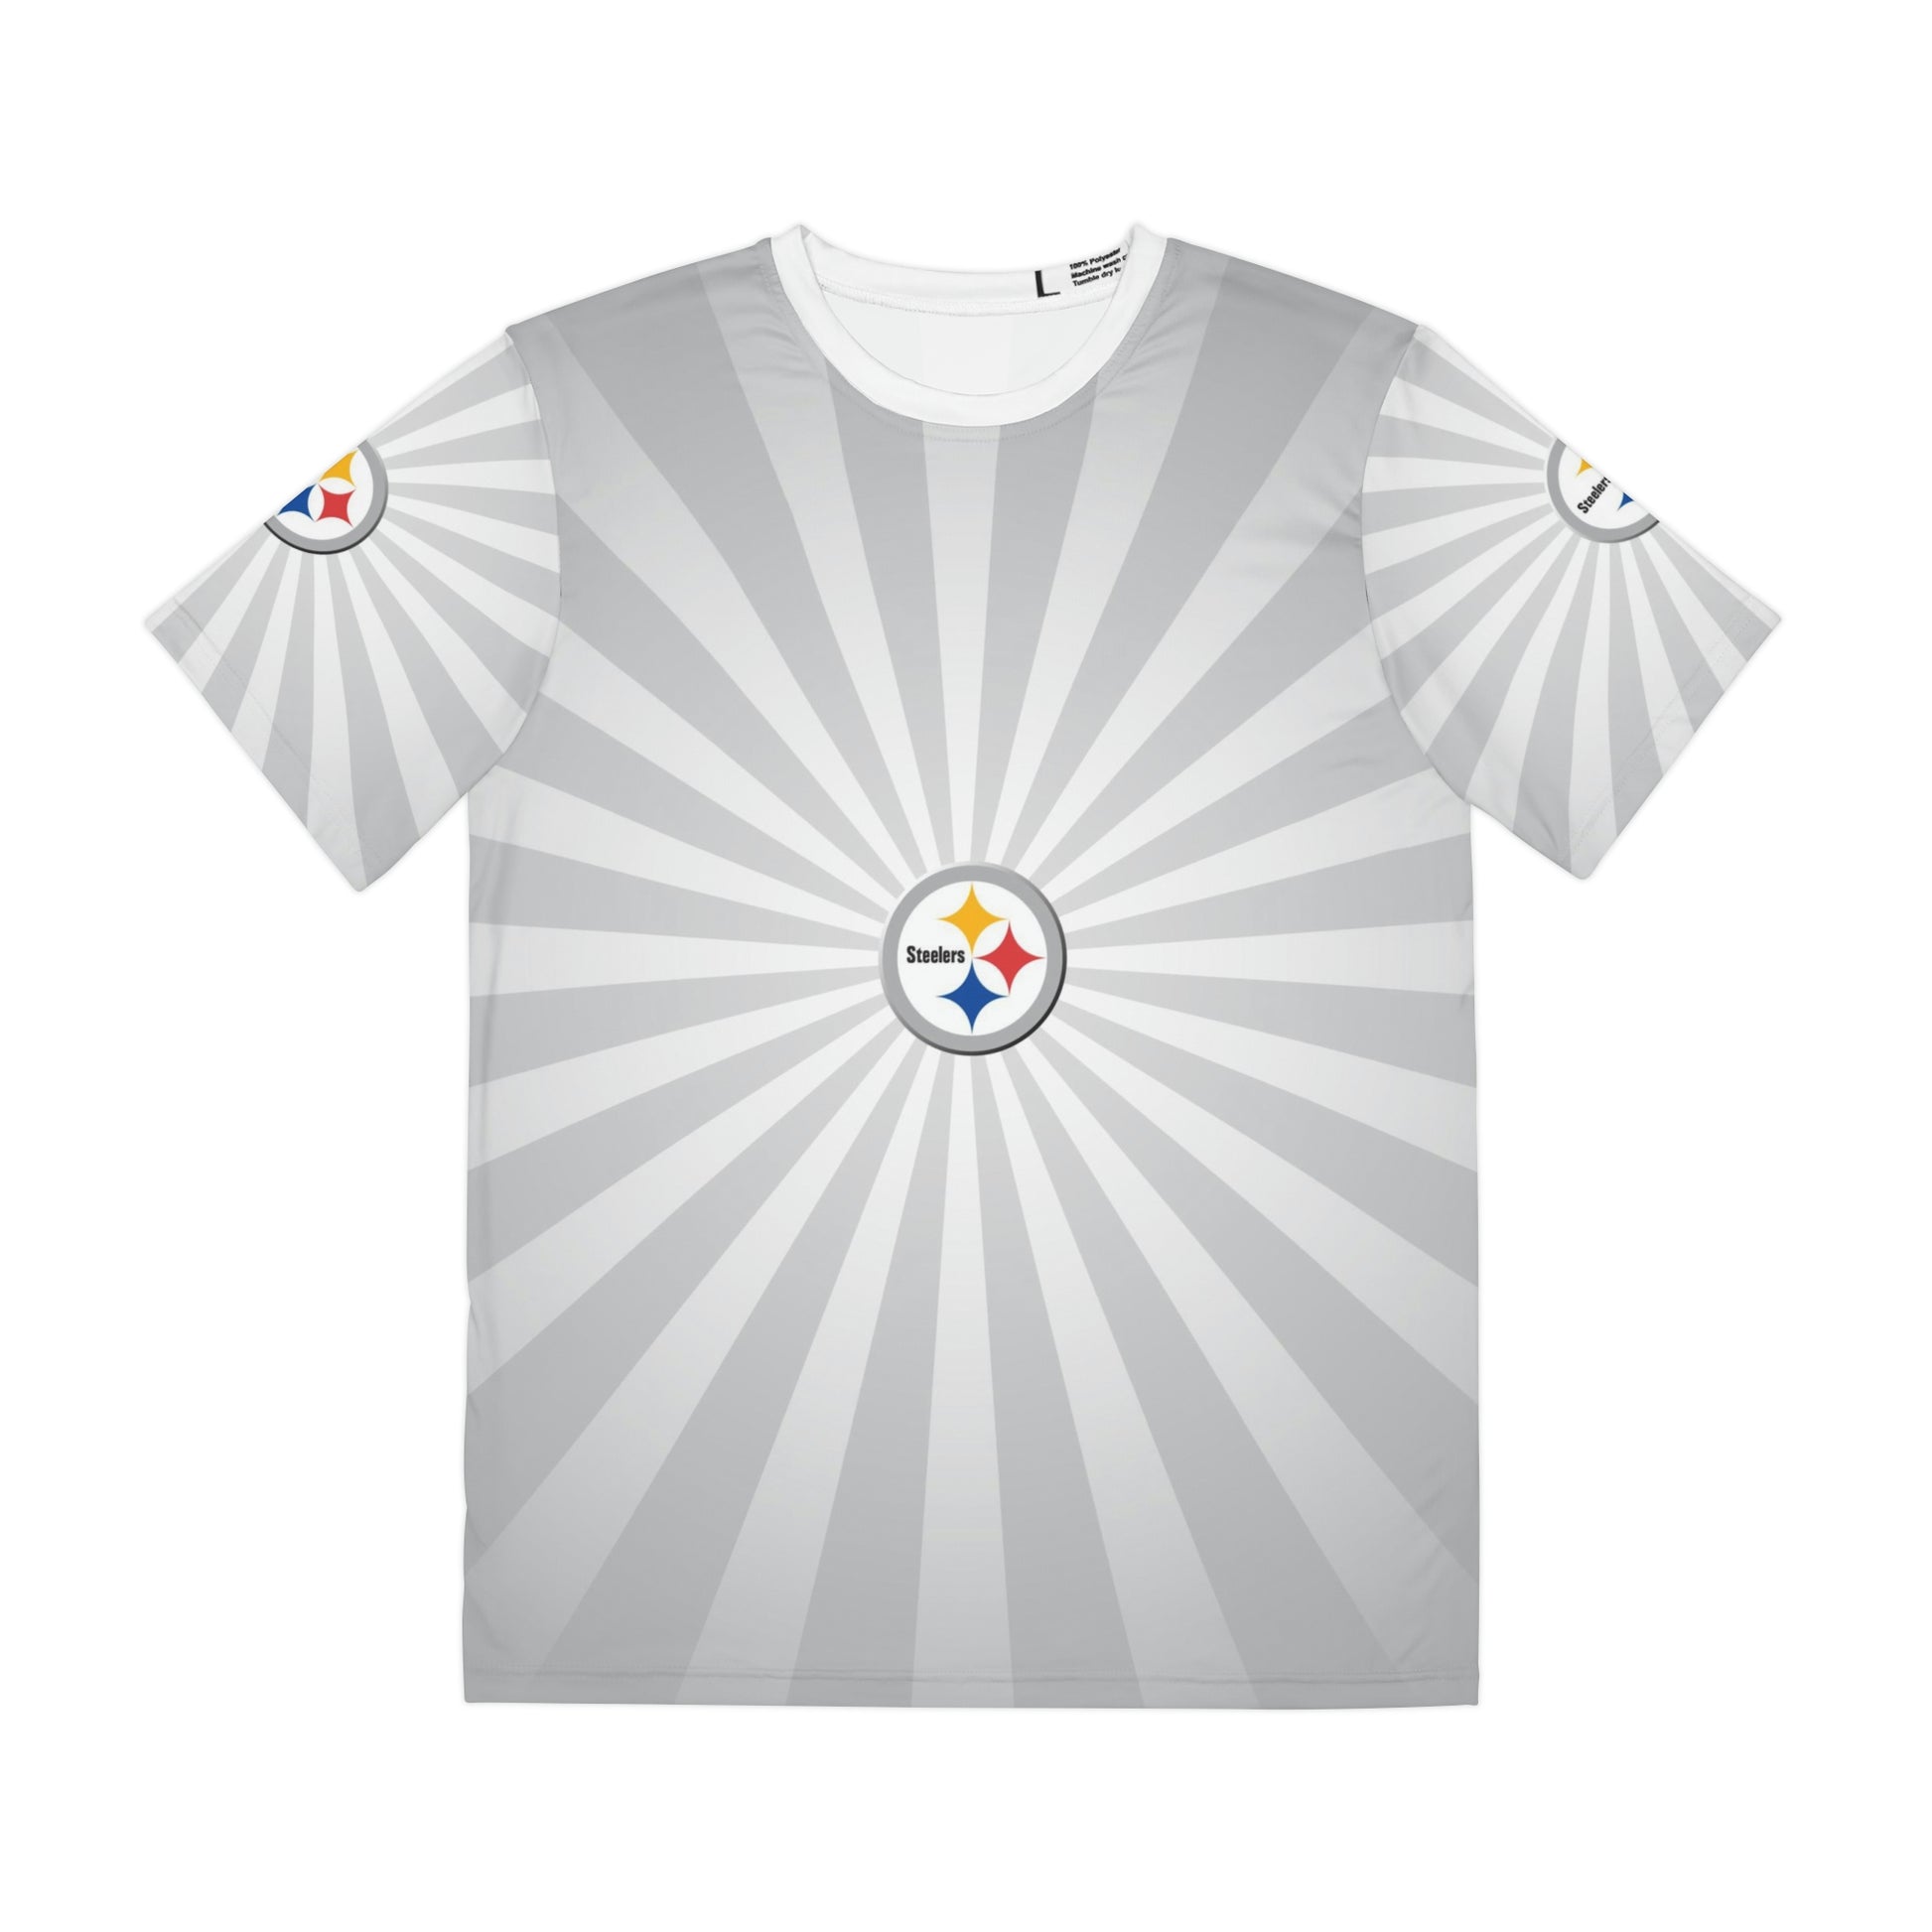 Geotrott NFL Pittsburgh Steelers Men's Polyester All Over Print Tee T-Shirt-All Over Prints-Geotrott